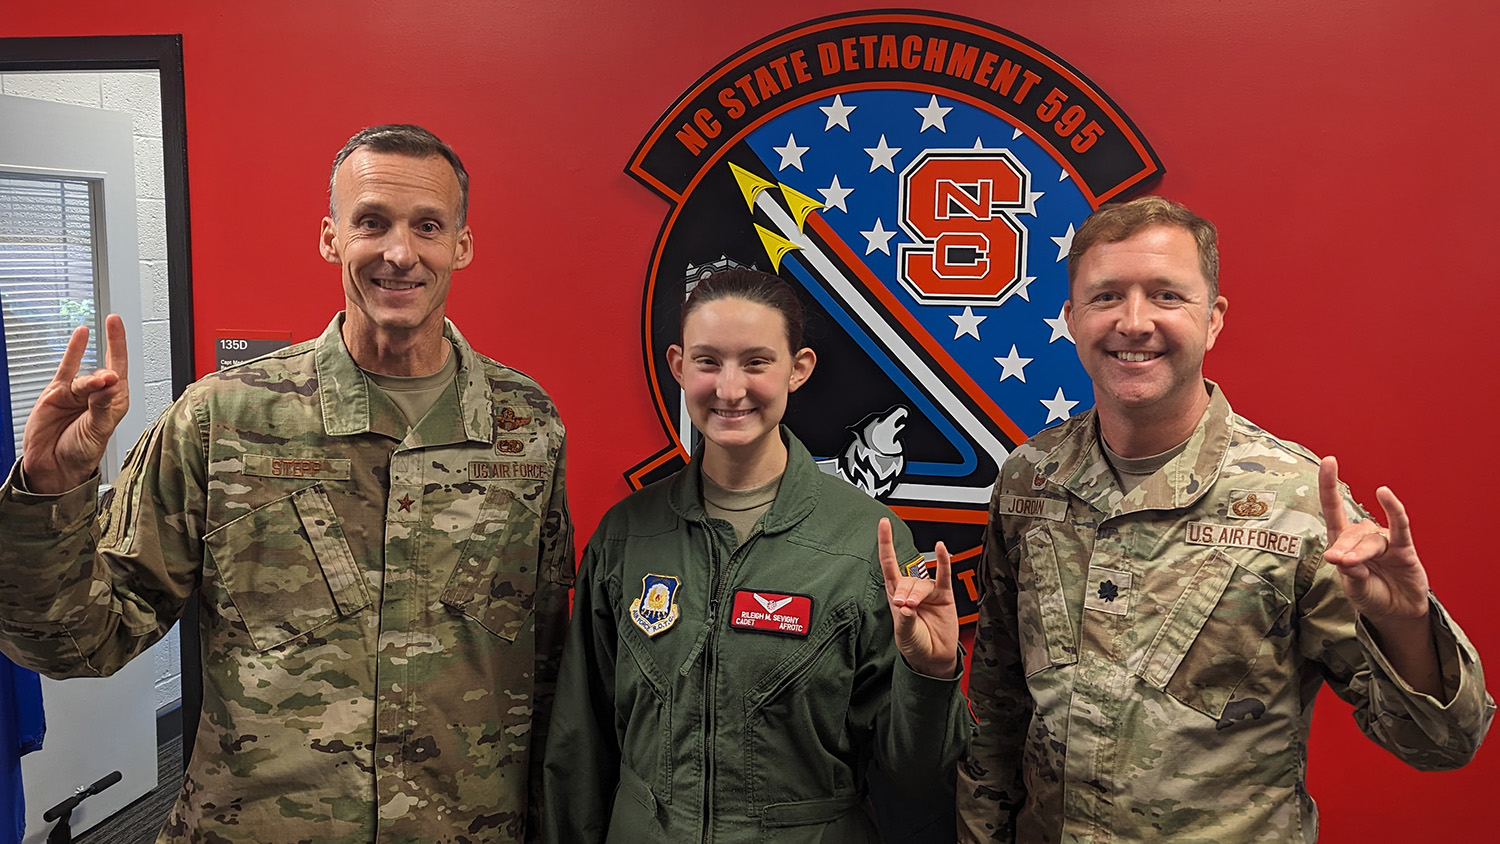 From left: Brigadier General Joseph Stepp, an NC State alum, NC State Air Force ROTC Cadet Rileigh Sevigny and Lieutenant Colonel Steven Jordan, the commanding officer of NC State's Air Force ROTC Detachment.